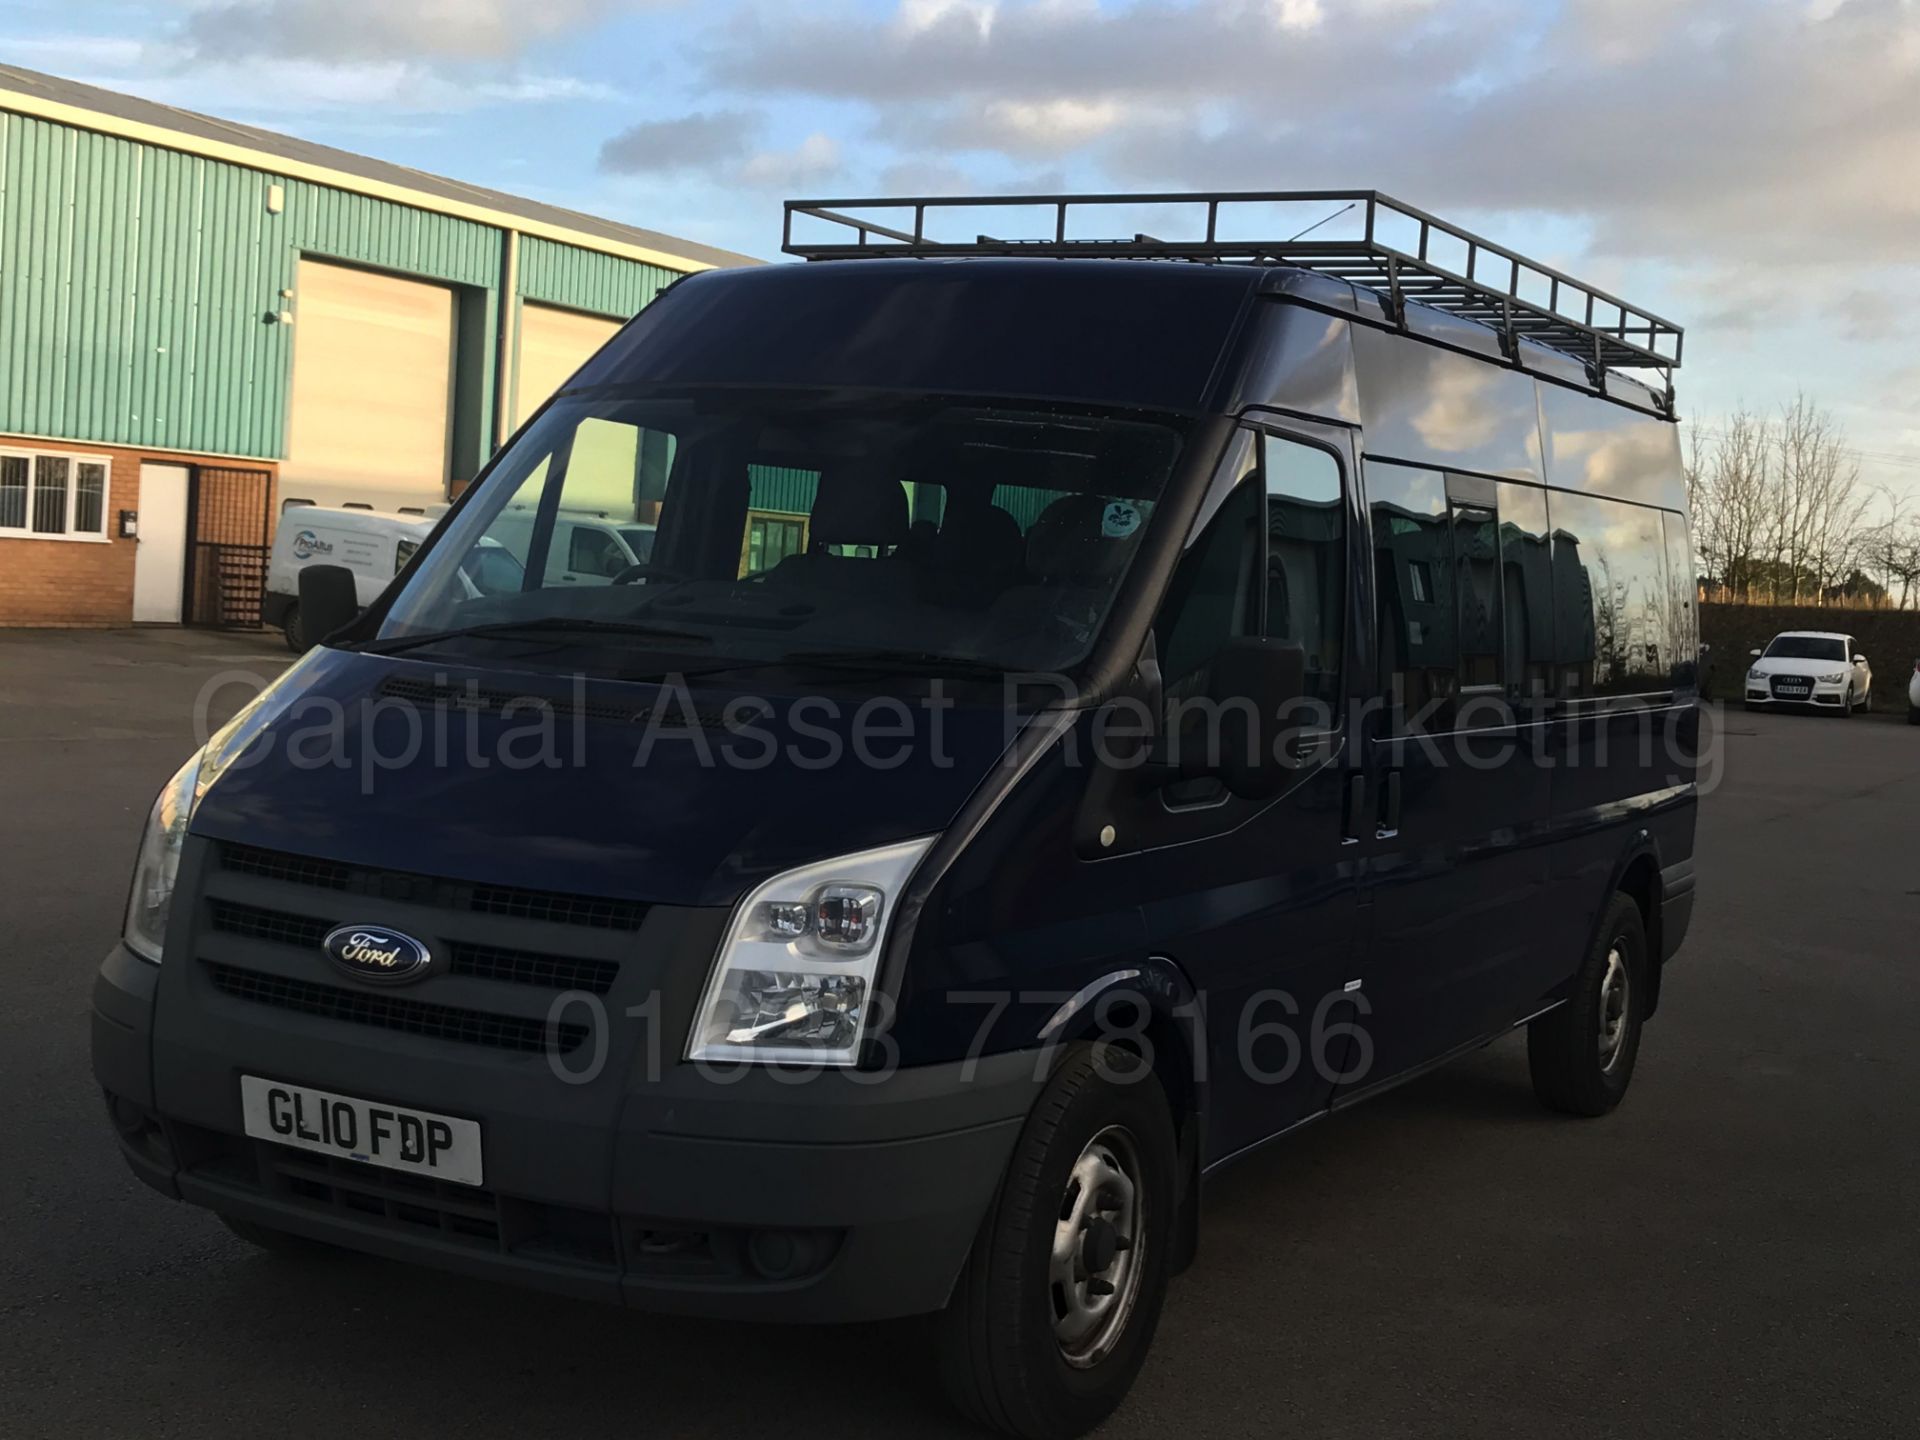 FORD TRANSIT 100 T350 '15 SEATER MINI-BUS' (2010 - 10 REG) '2.4 TDCI - 100 BHP - 5 SPEED' *AIR CON* - Image 4 of 28